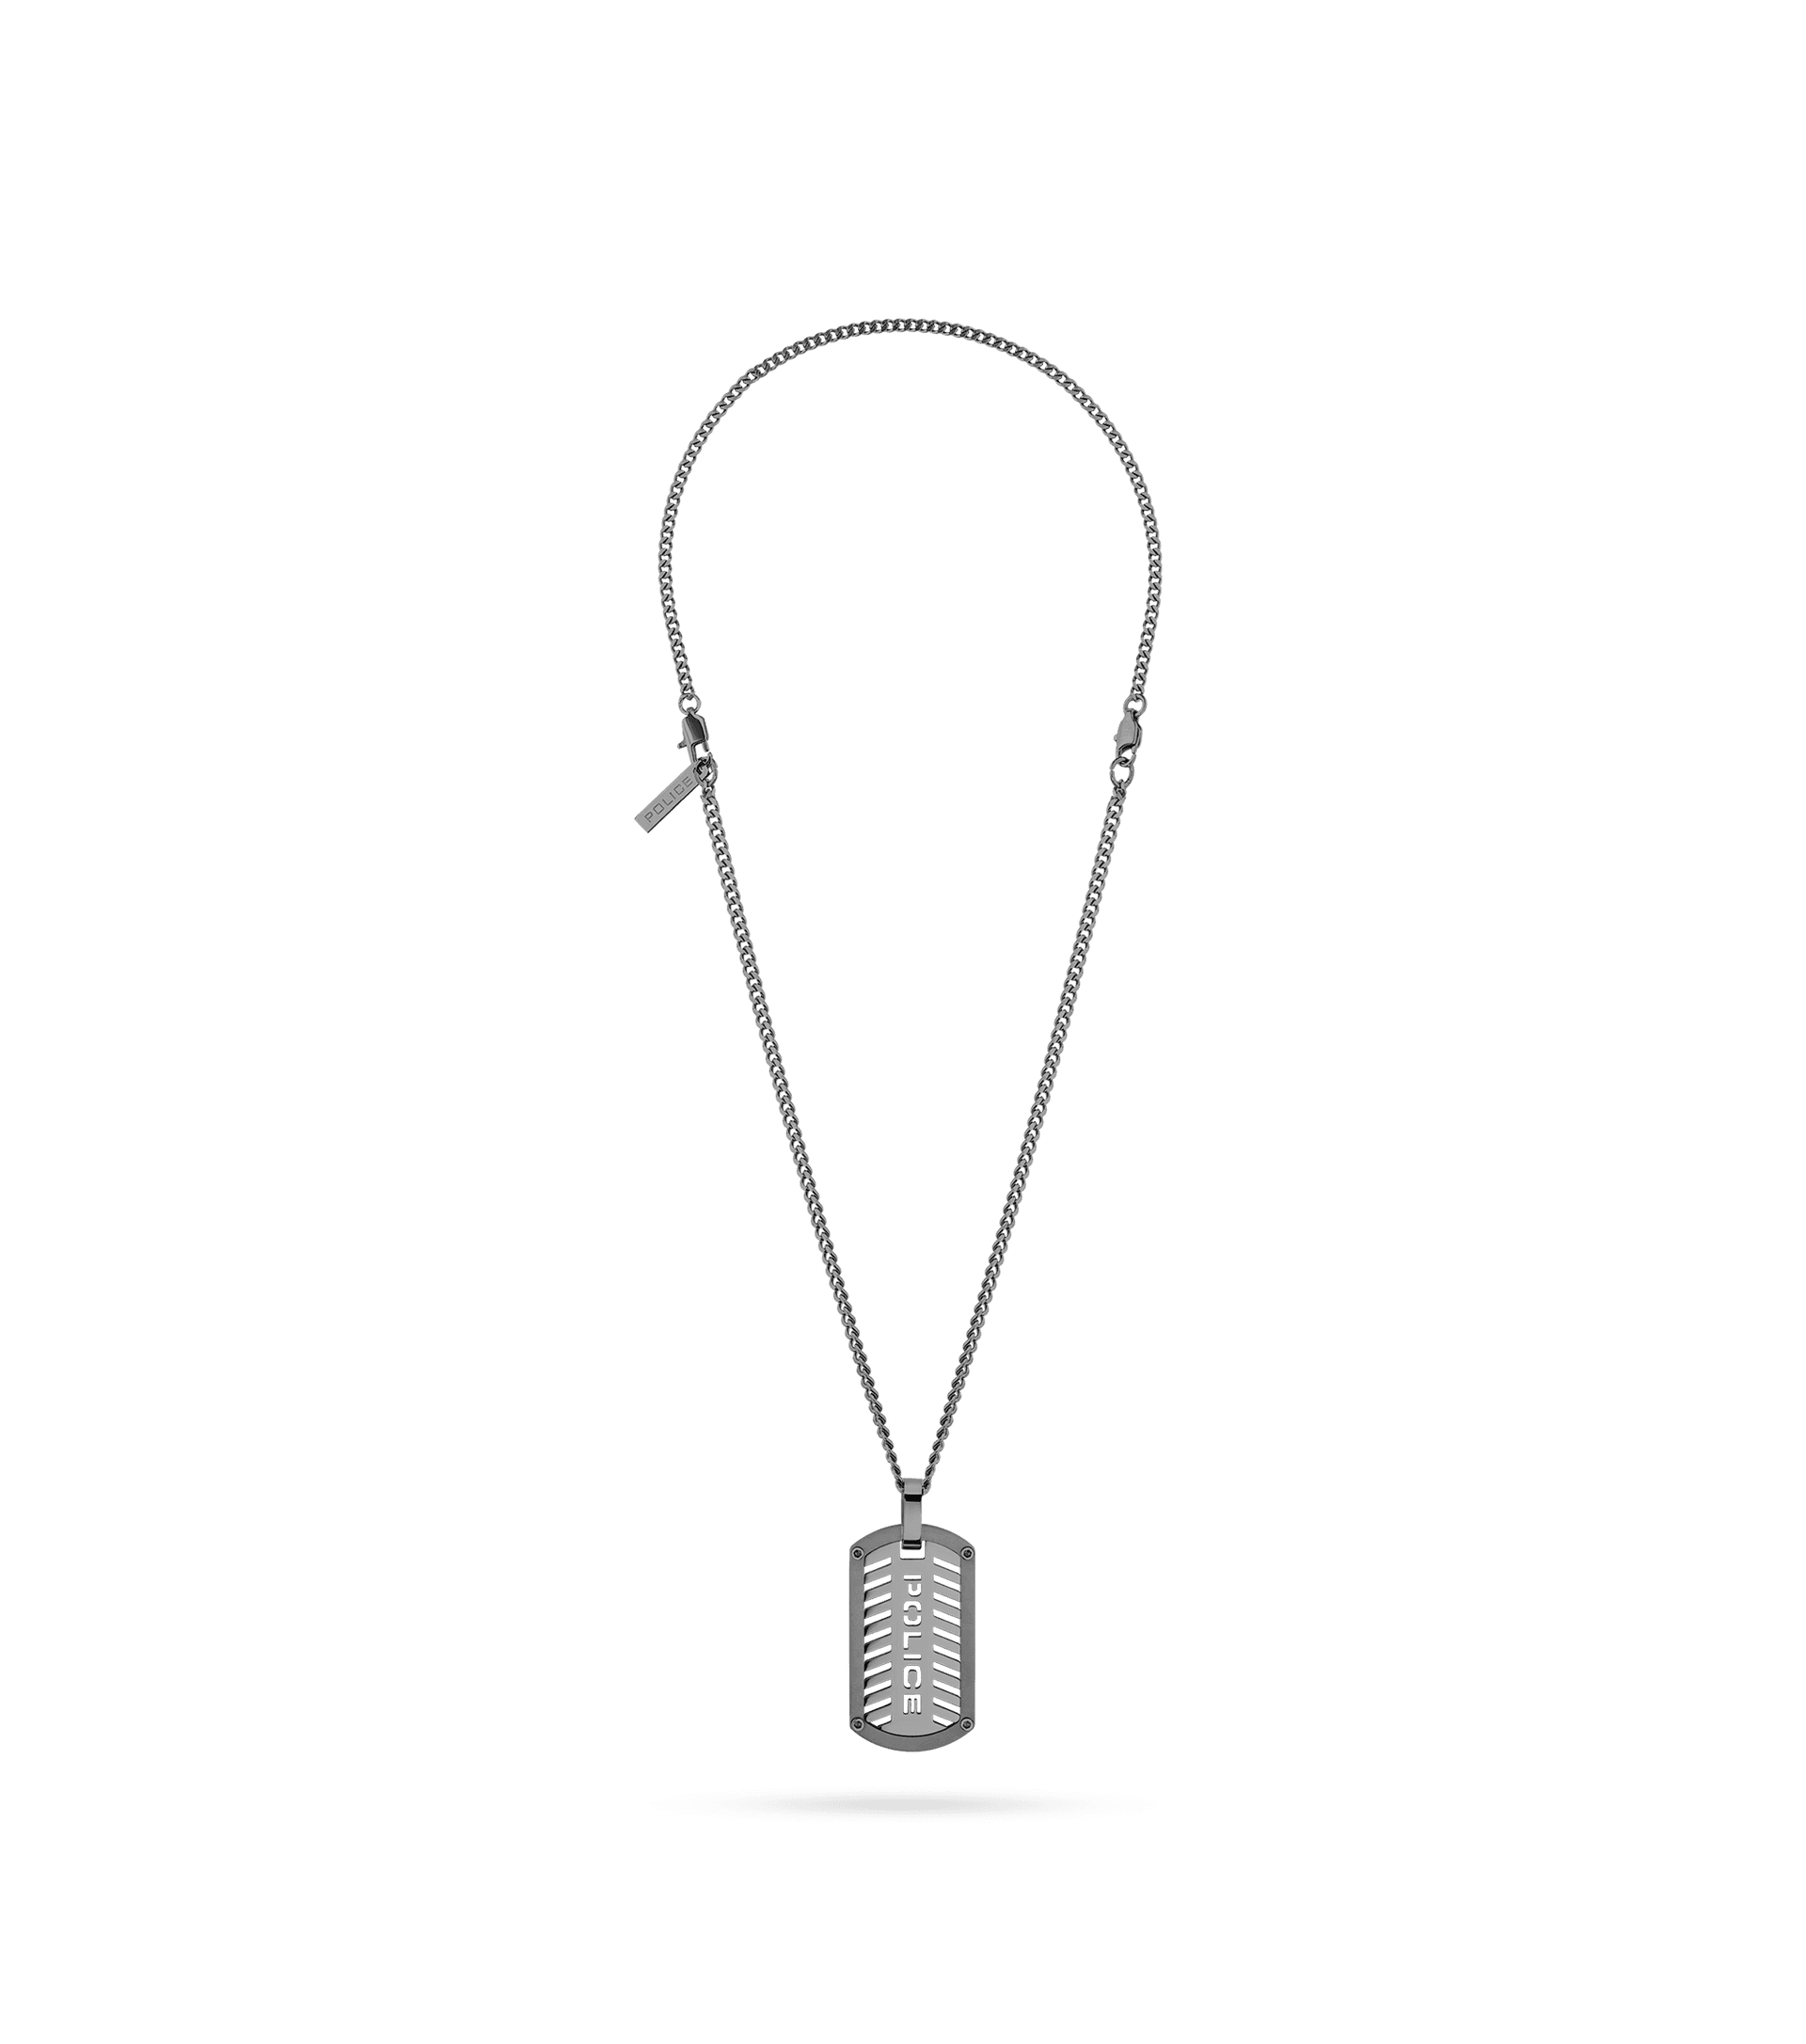 Police jewels - Hinged Necklace Men PEAGN2211611 For Police